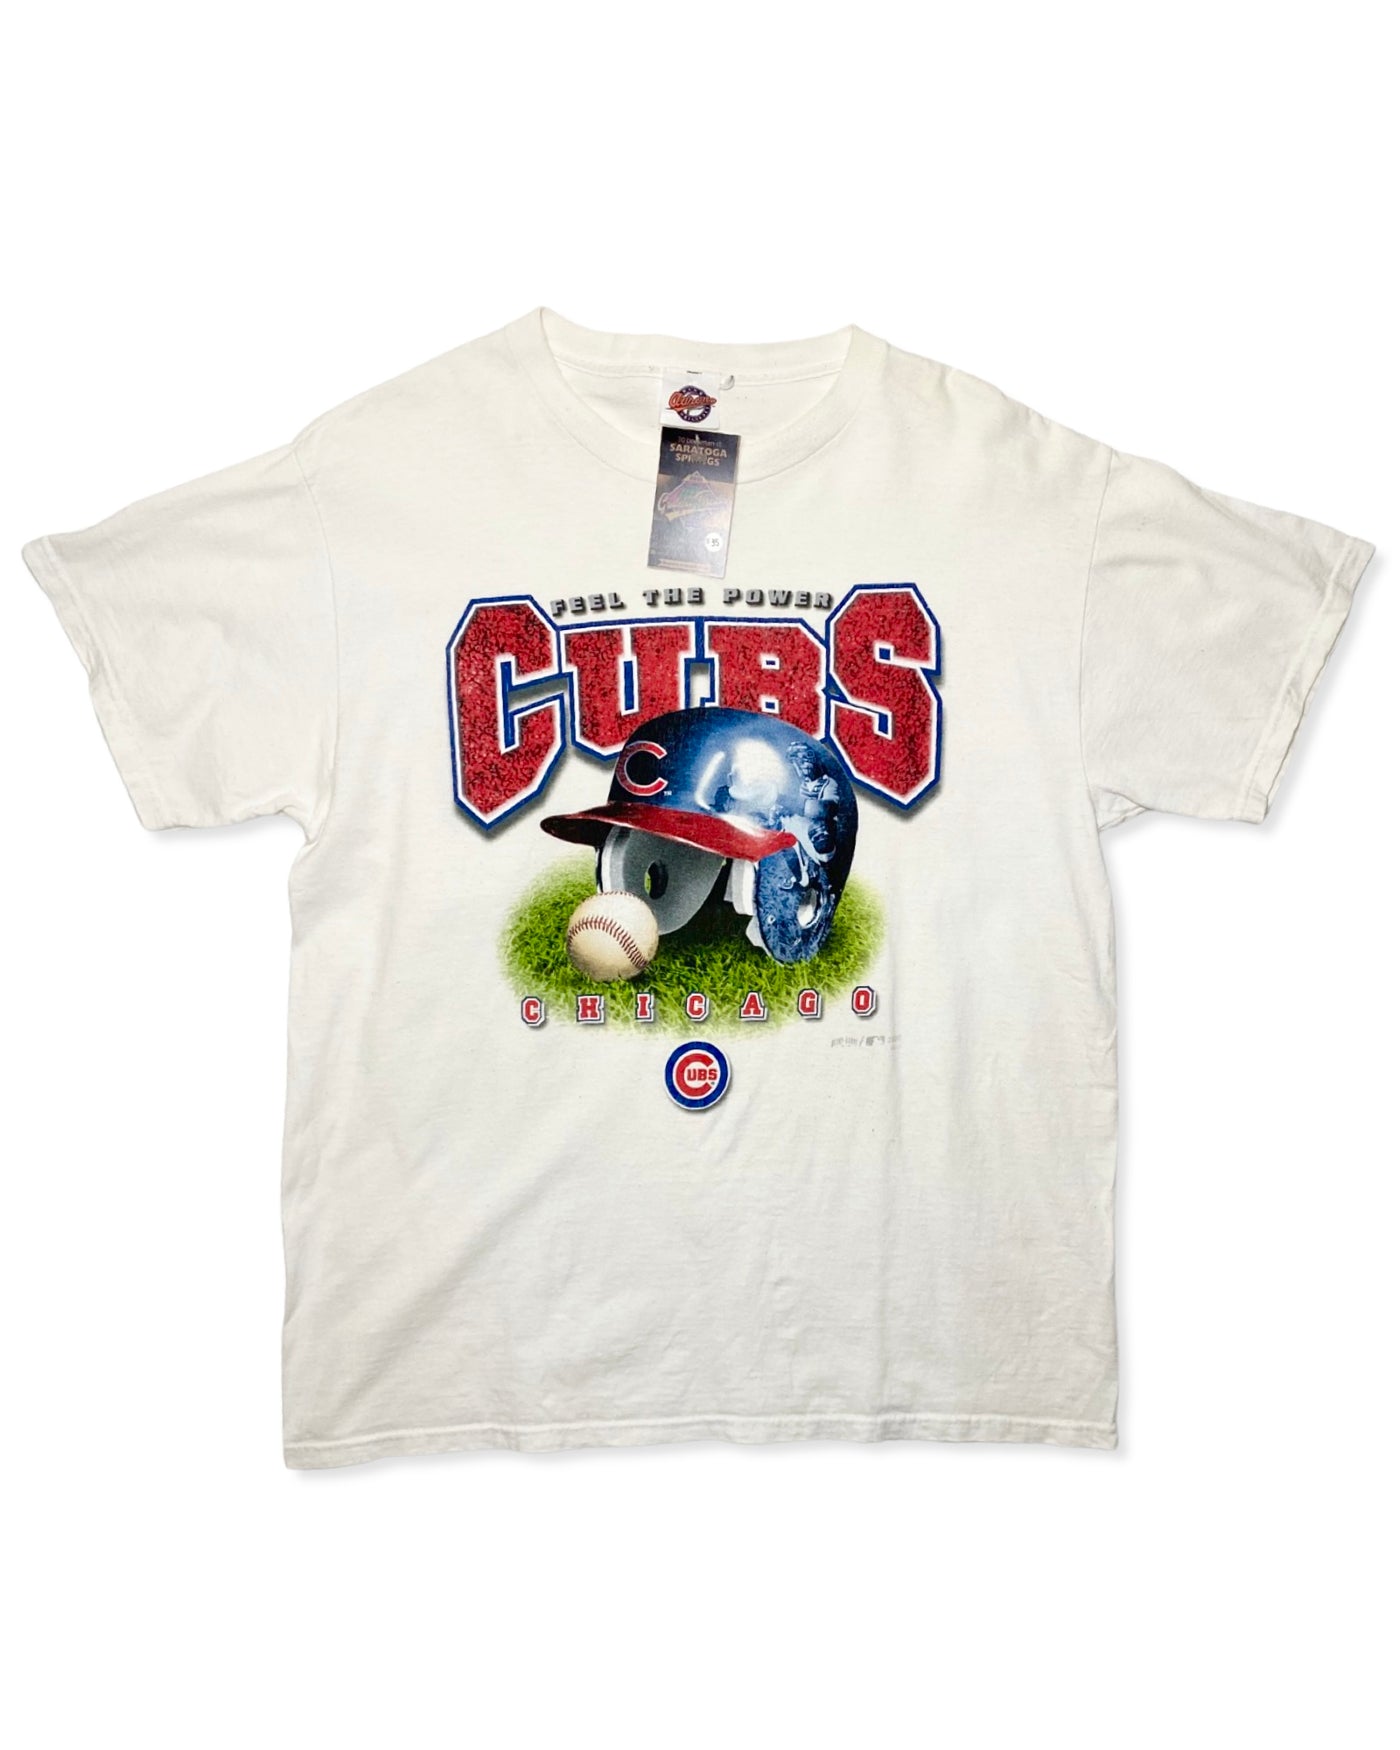 Vintage 1999 Chicago Cubs Graphic T-Shirt